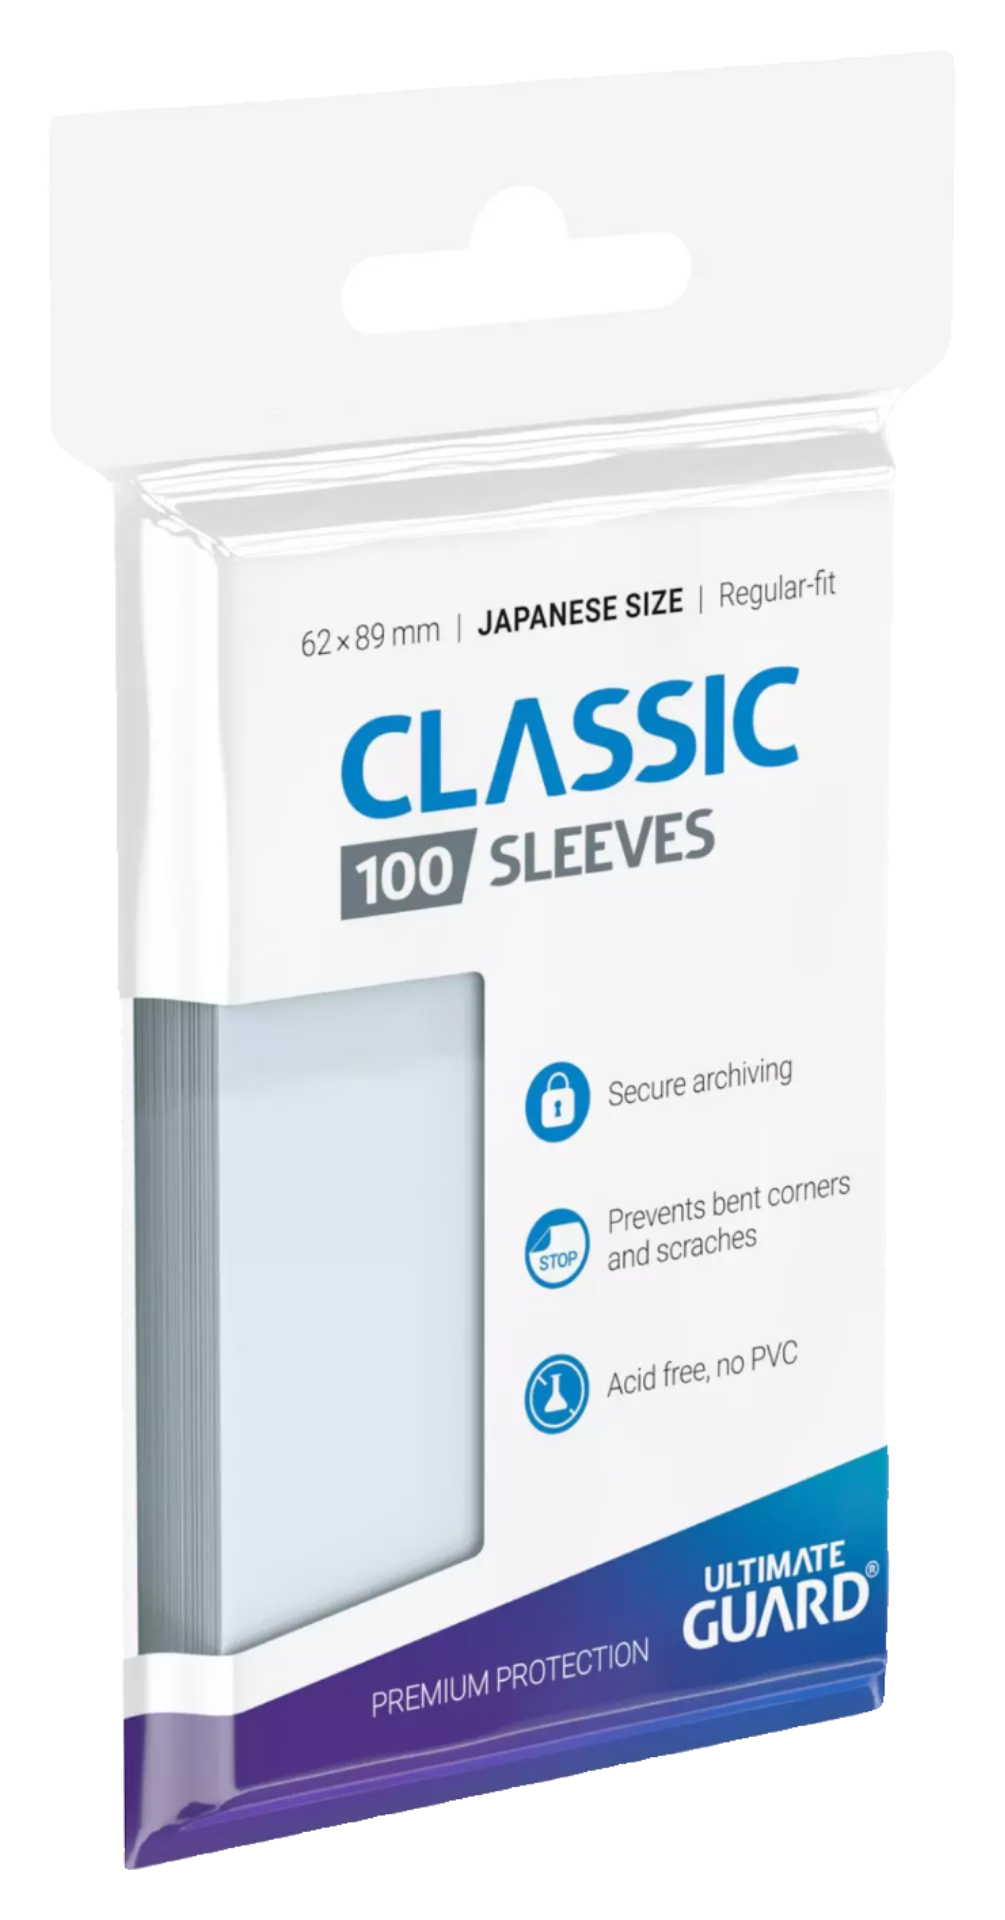 Ultimate Guard - Classic Sleeves - Japanese Size - 100pk